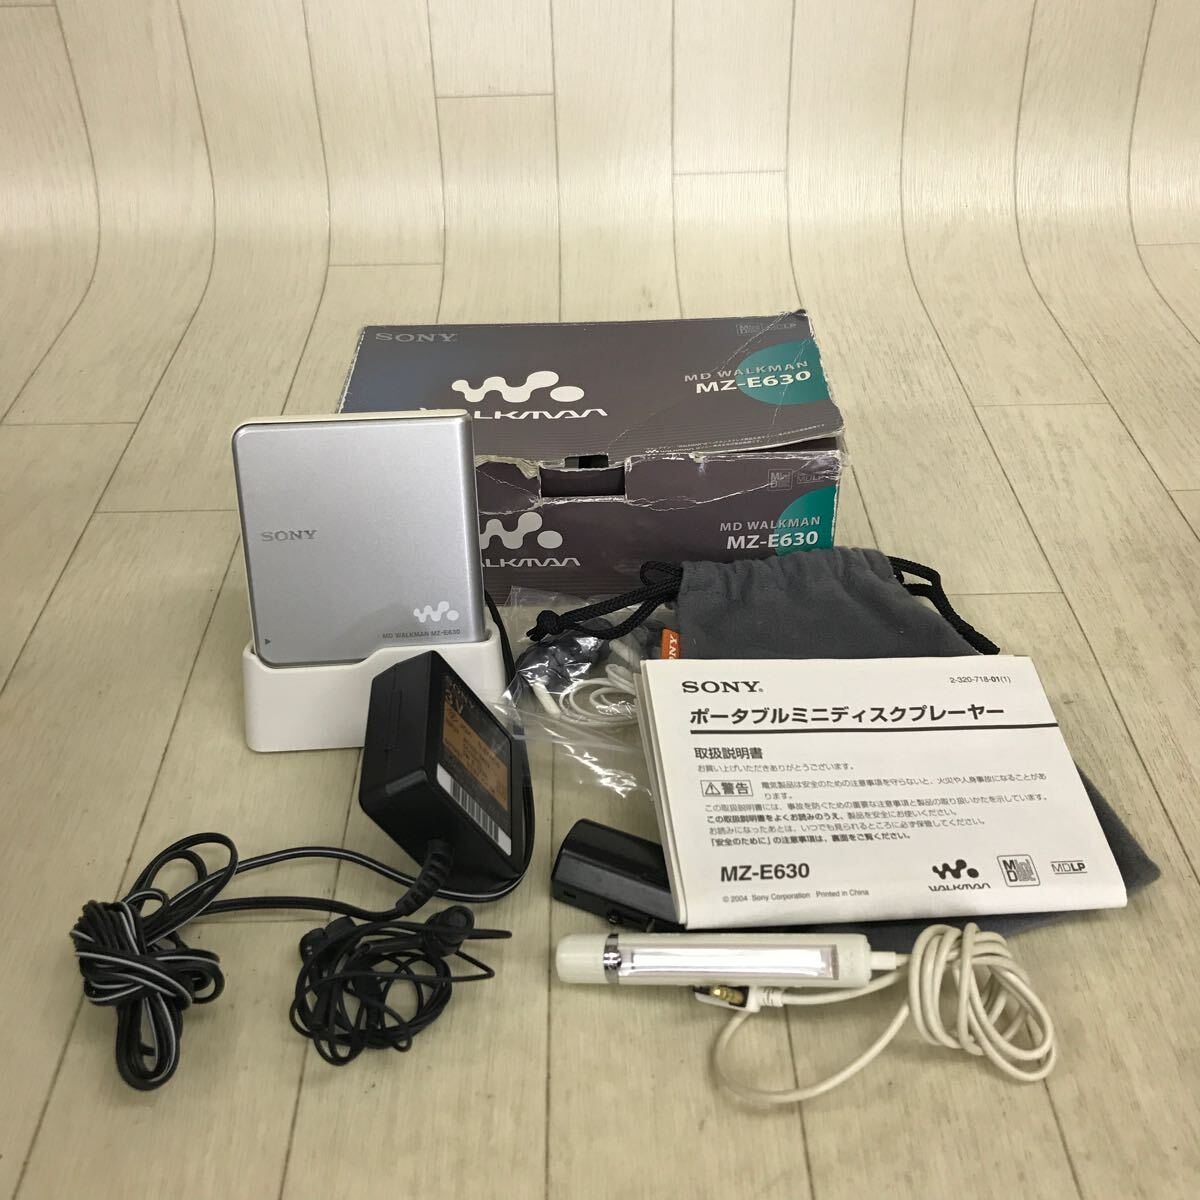 B1997 operation goods MD reproduction has confirmed SONY MZ-E630 MD WALKMAN PORTABLE MD PLAYER MDLP Sony Walkman portable MD player with charger .